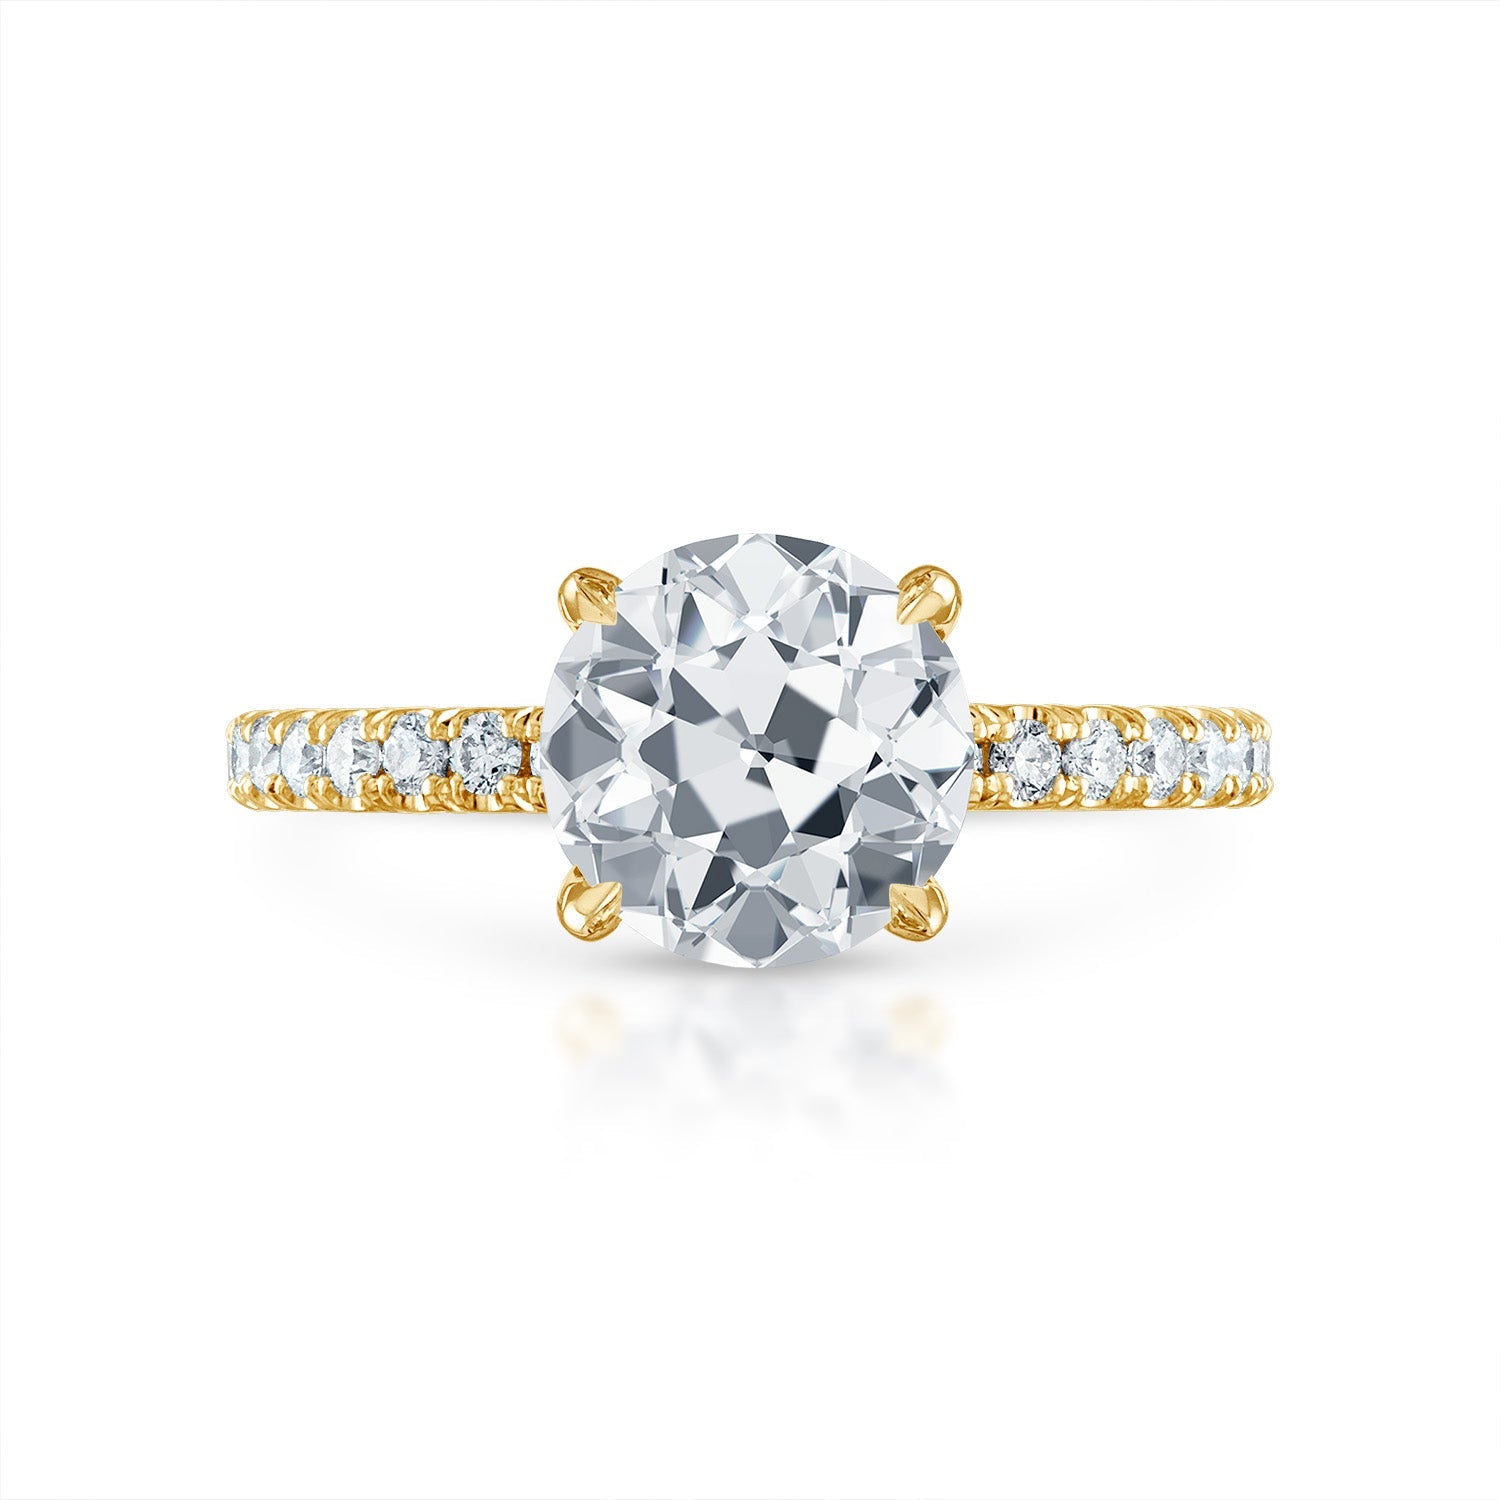 Antique Pave Engagement Ring in Yellow Gold